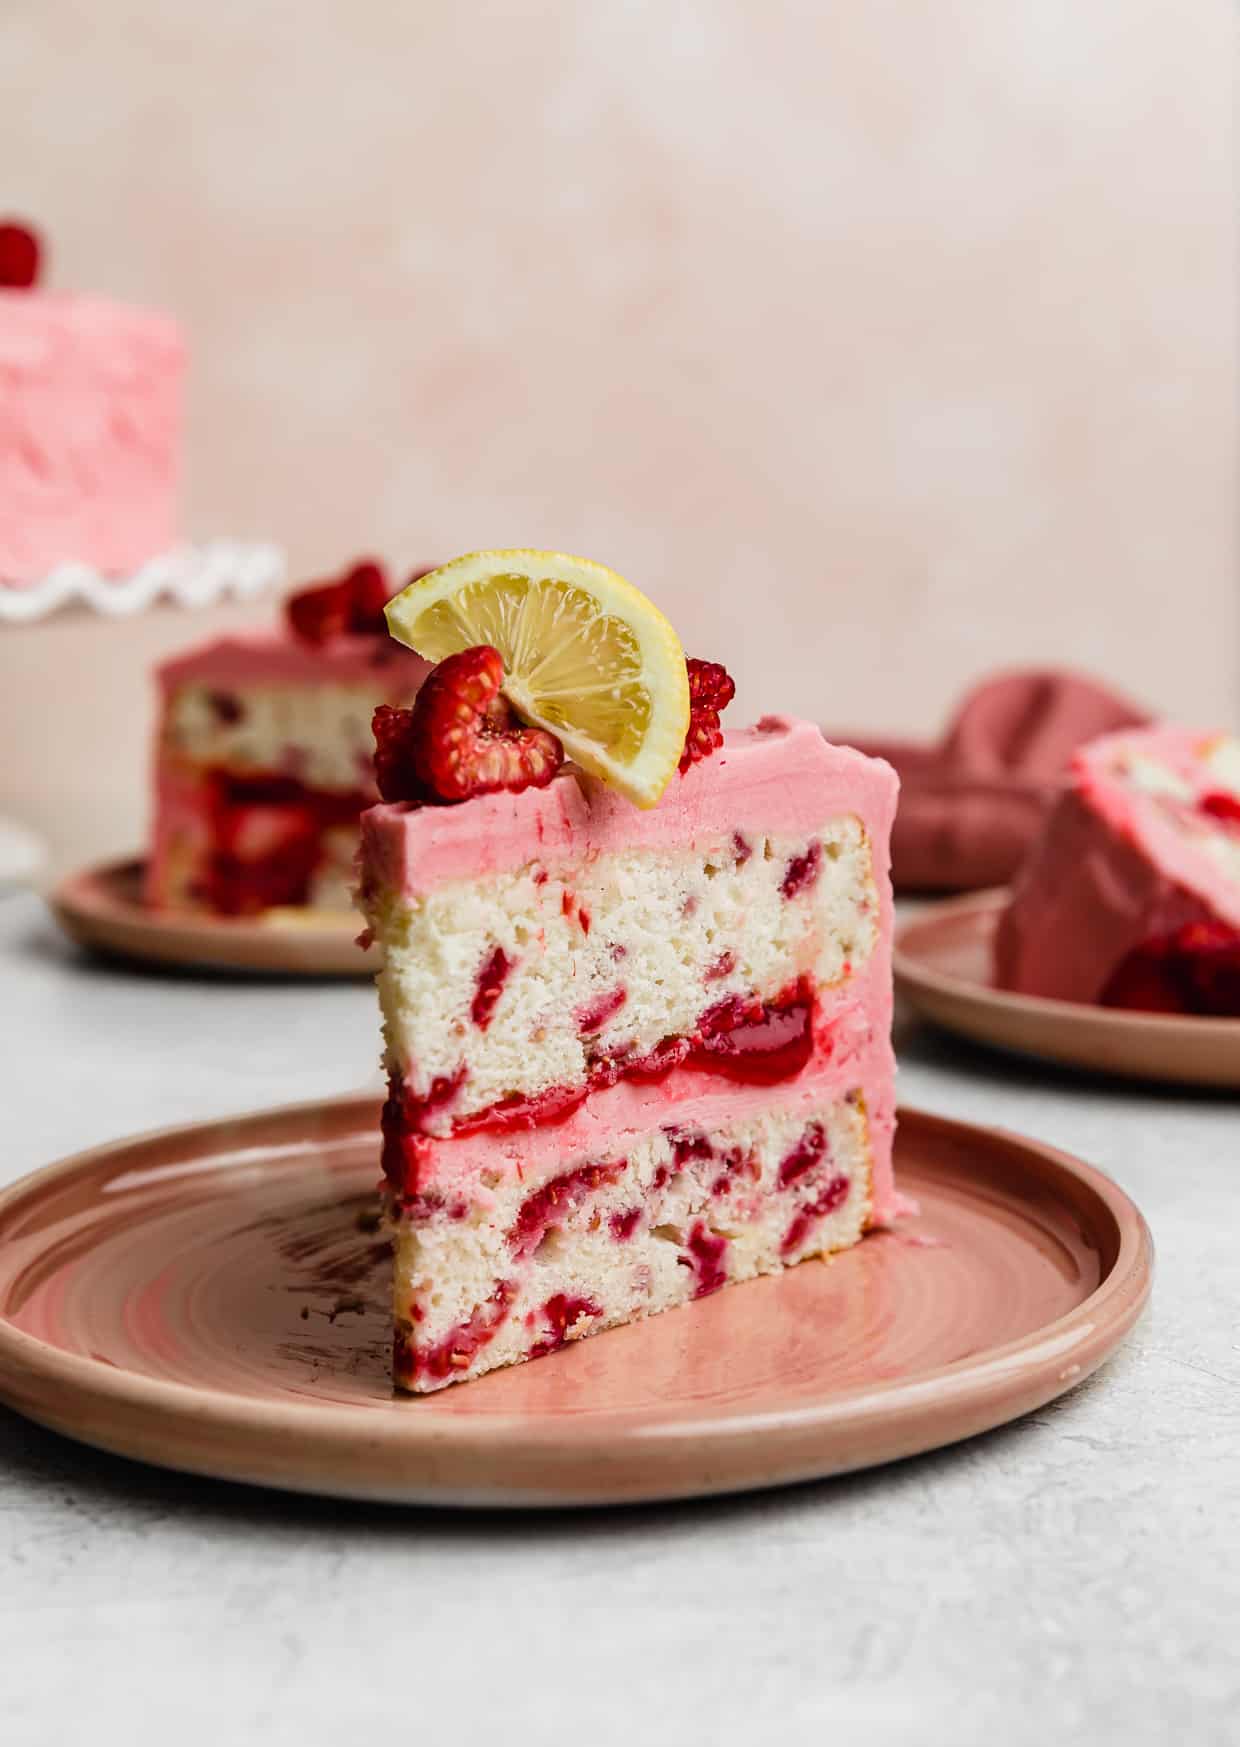 A slice of Lemon Raspberry Cake on a pink plate against a light pink background.